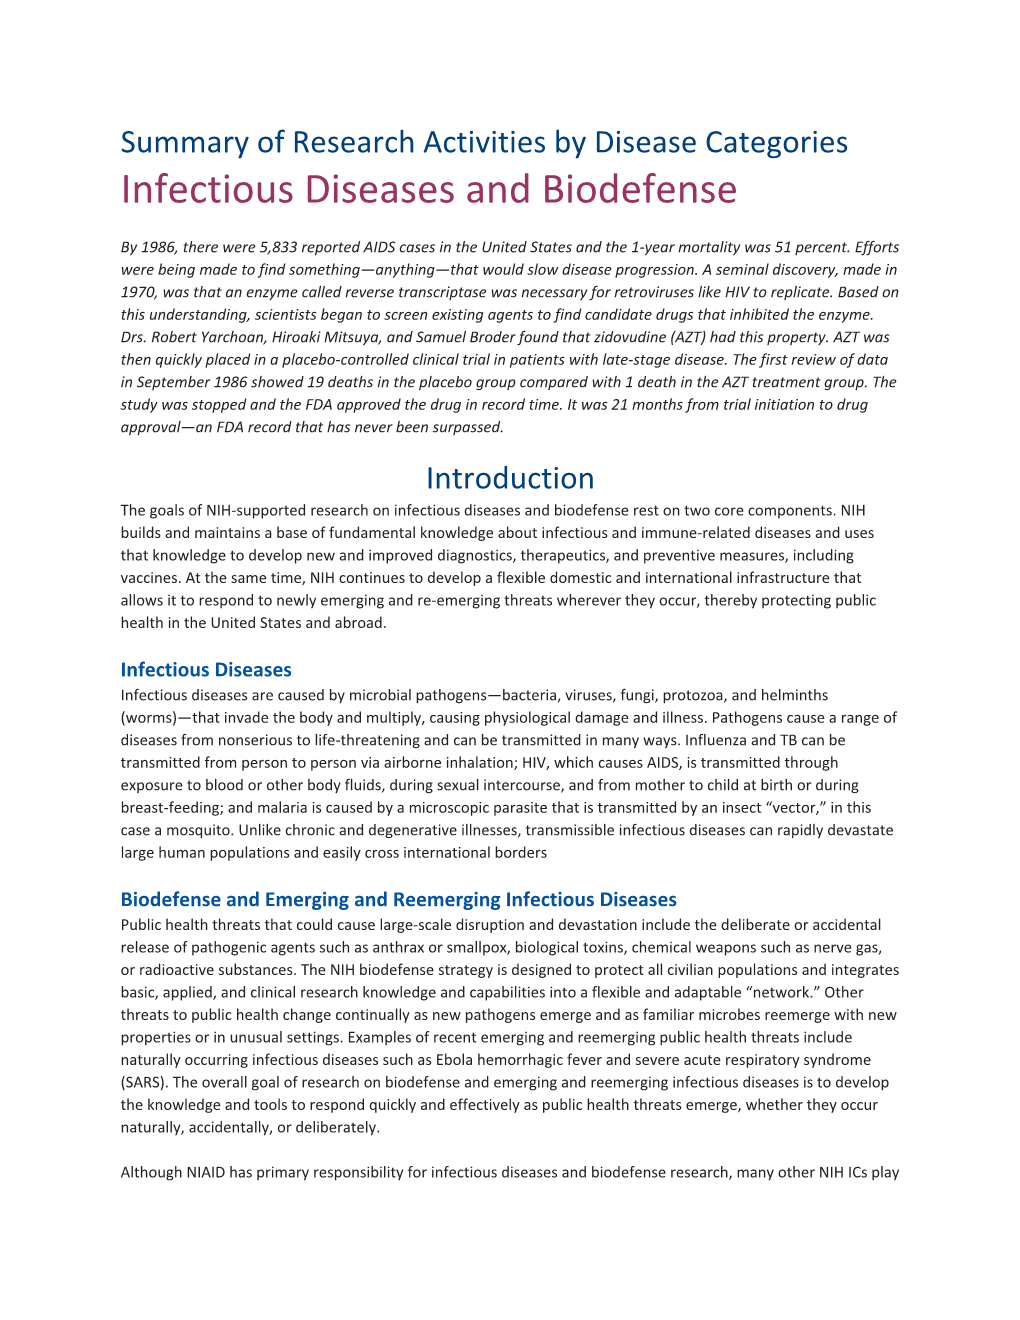 Infectious Diseases and Biodefense